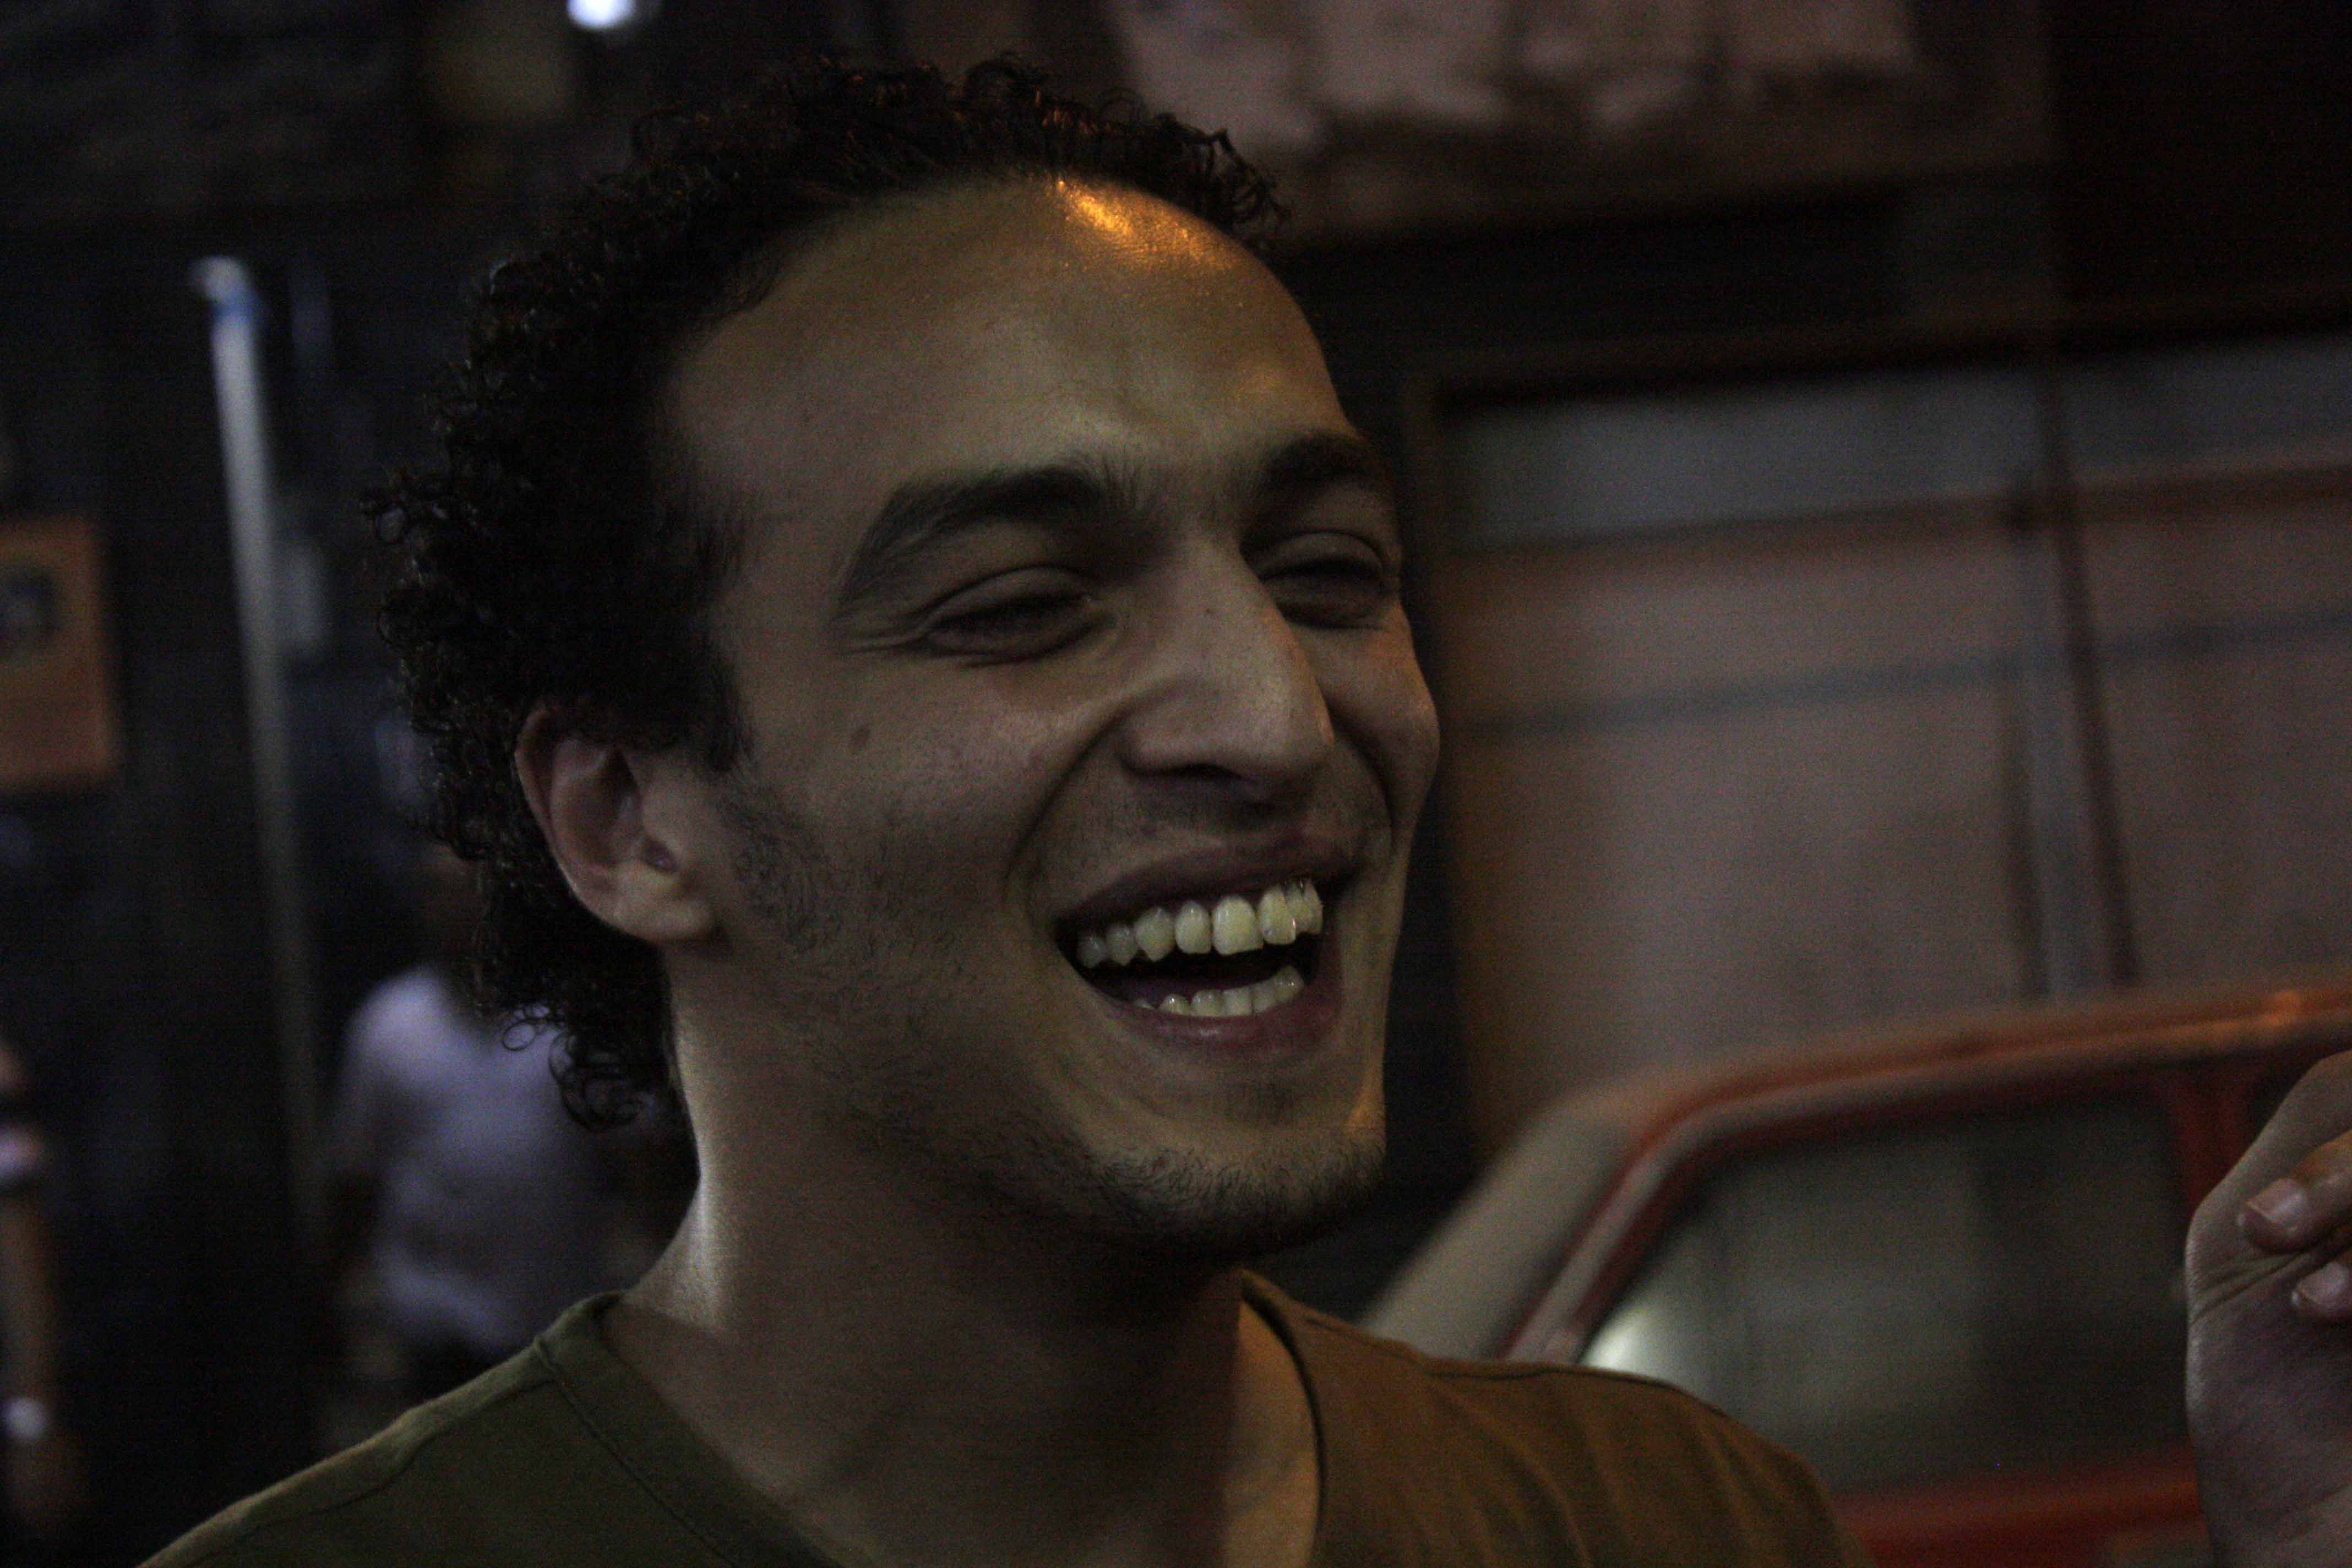 Photojournalist Mahmoud Abou Zeid, known as Shawkan, was arrested on Aug. 14, 2013, as he was taking pictures of the violent dispersal of the Rabaa al-Adaweya sit-in. (Courtesy of Amnesty International)